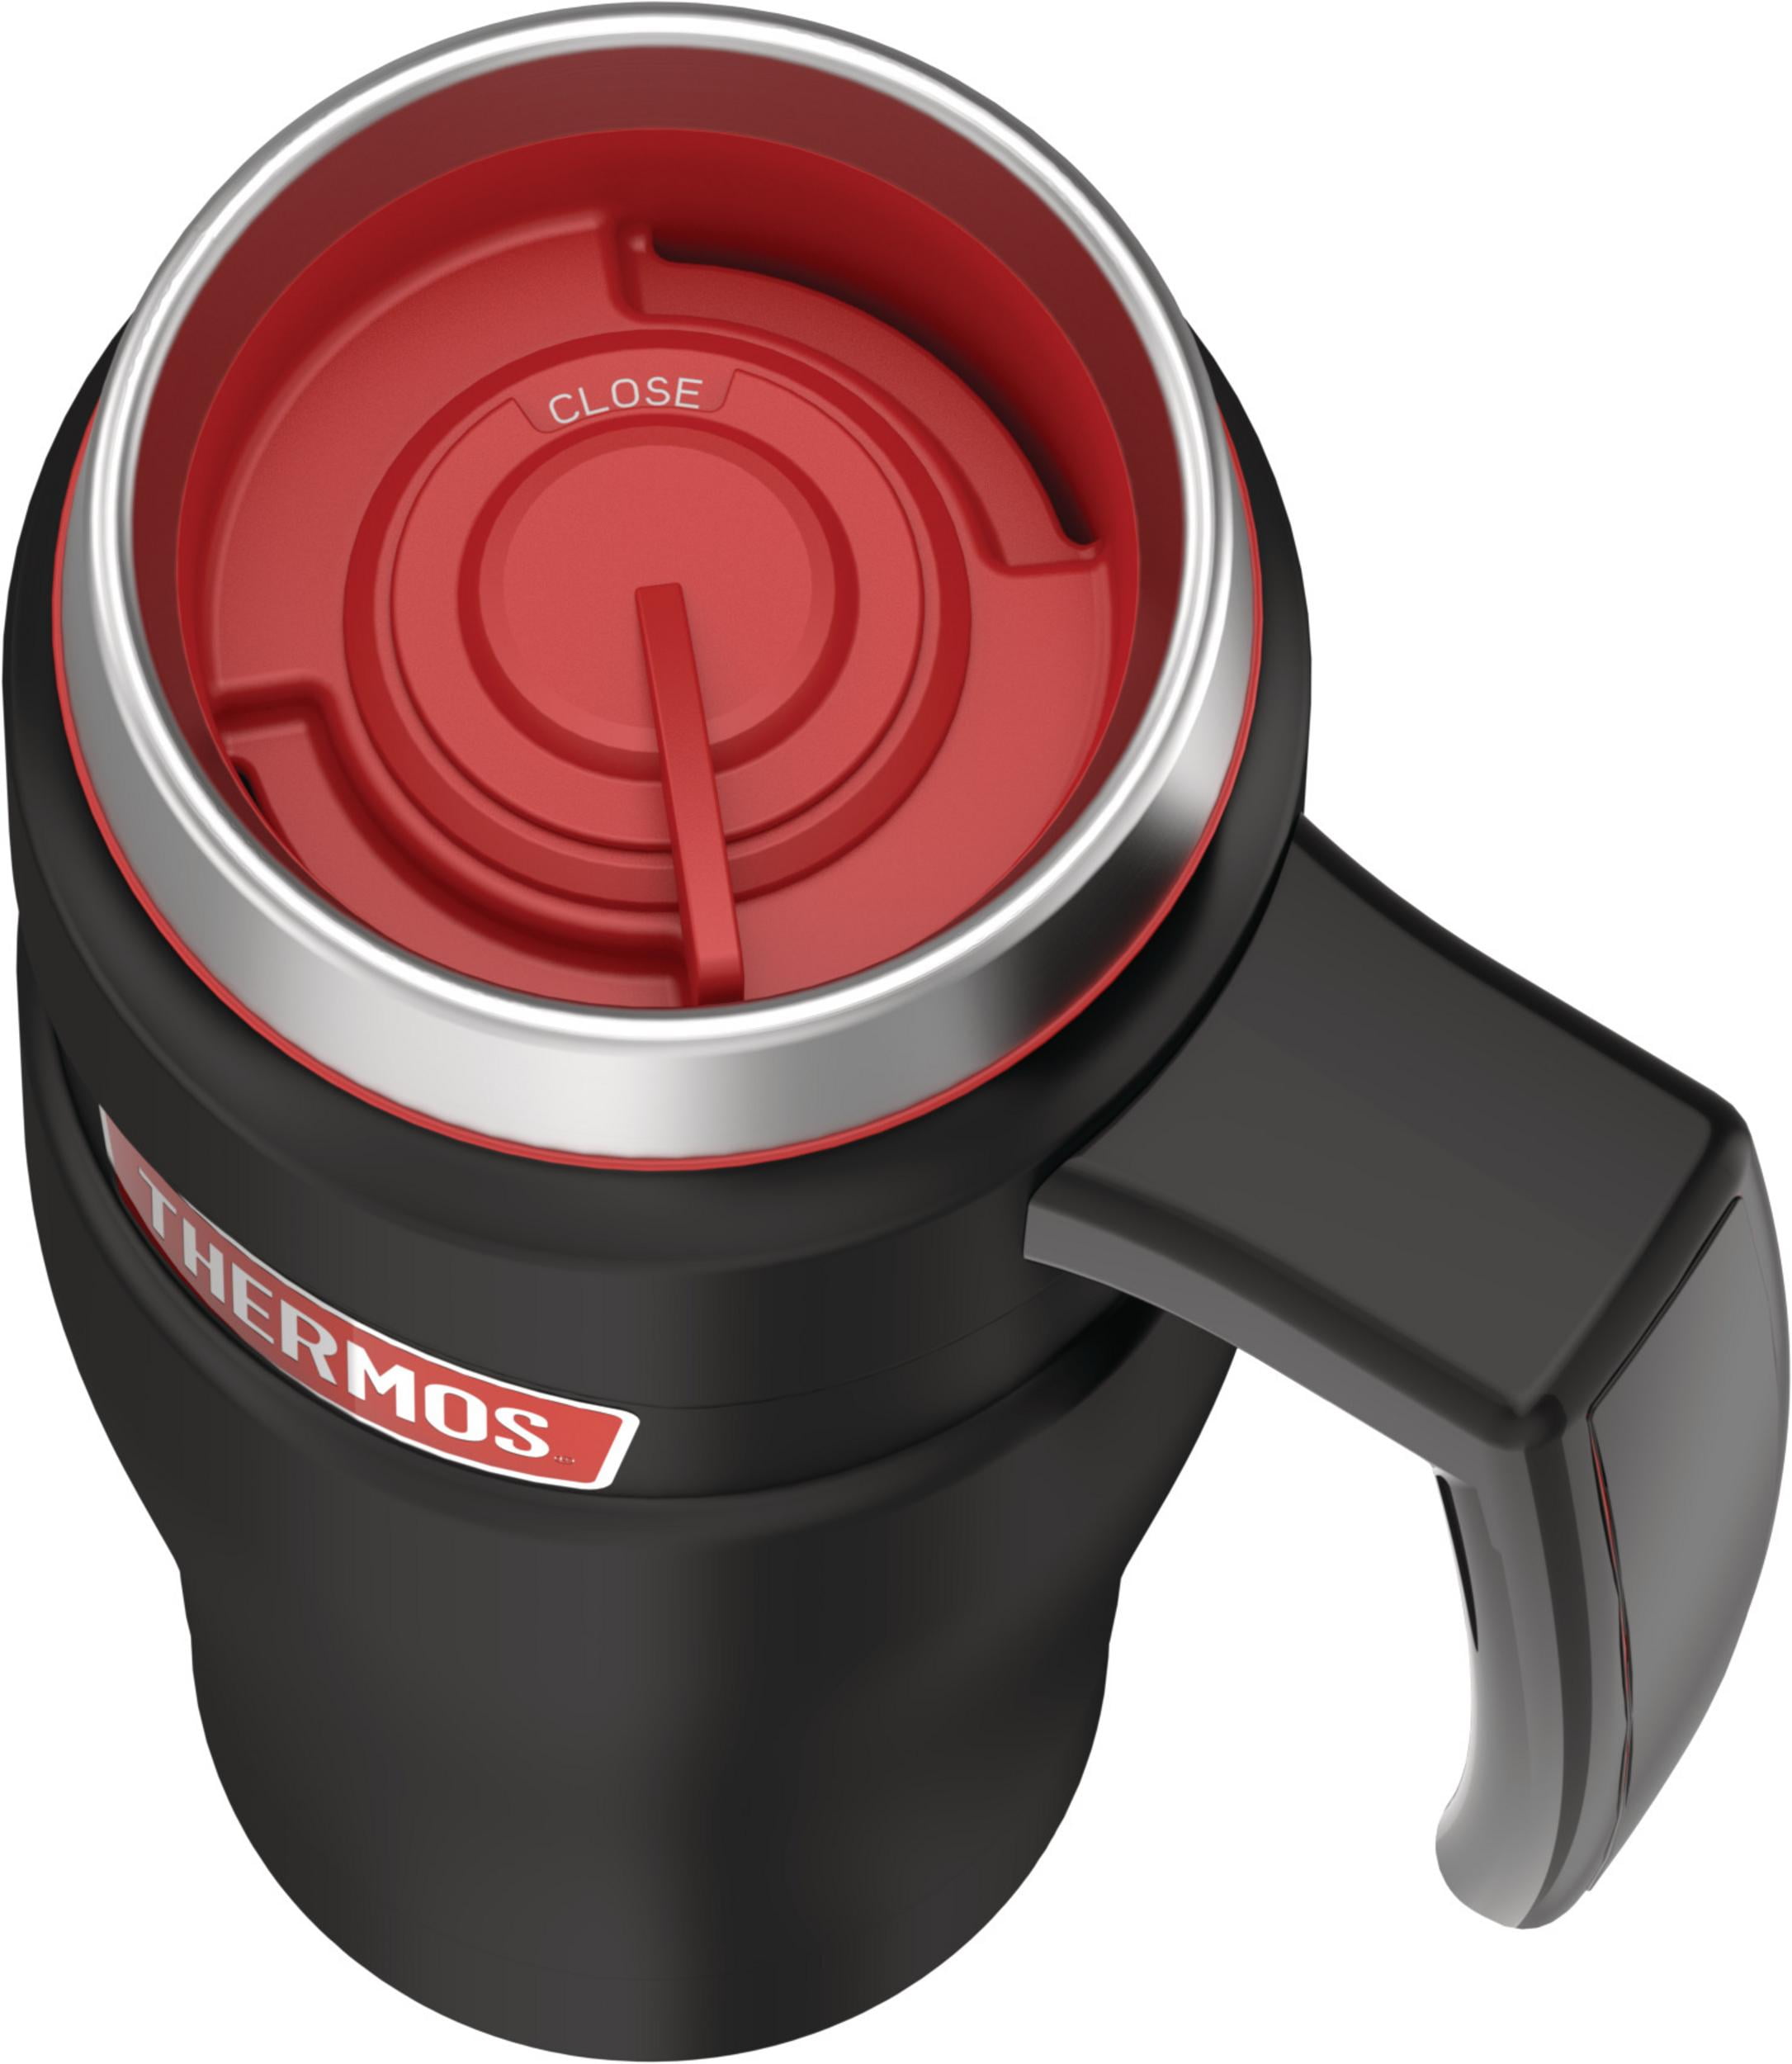  Thermos Stainless King 16oz Desk Mug, 16 Ounce, Matte Red :  Everything Else